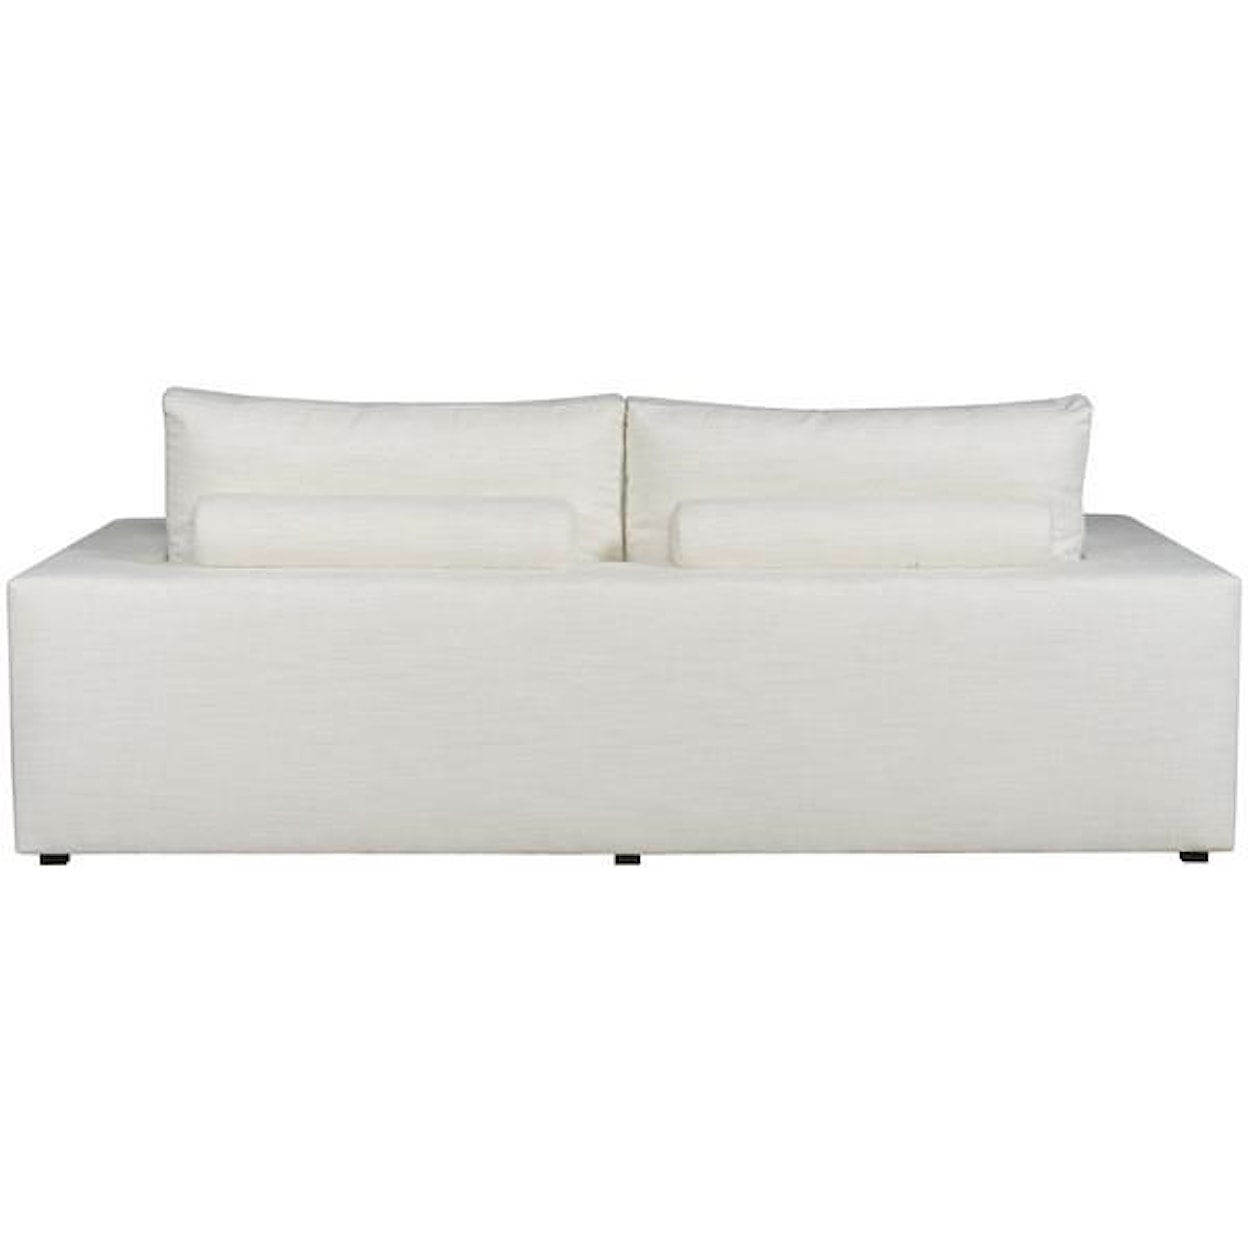 Vanguard Furniture EASE STOCKED SOFAS AND CHAIRS Lucca Two Seat Sofa